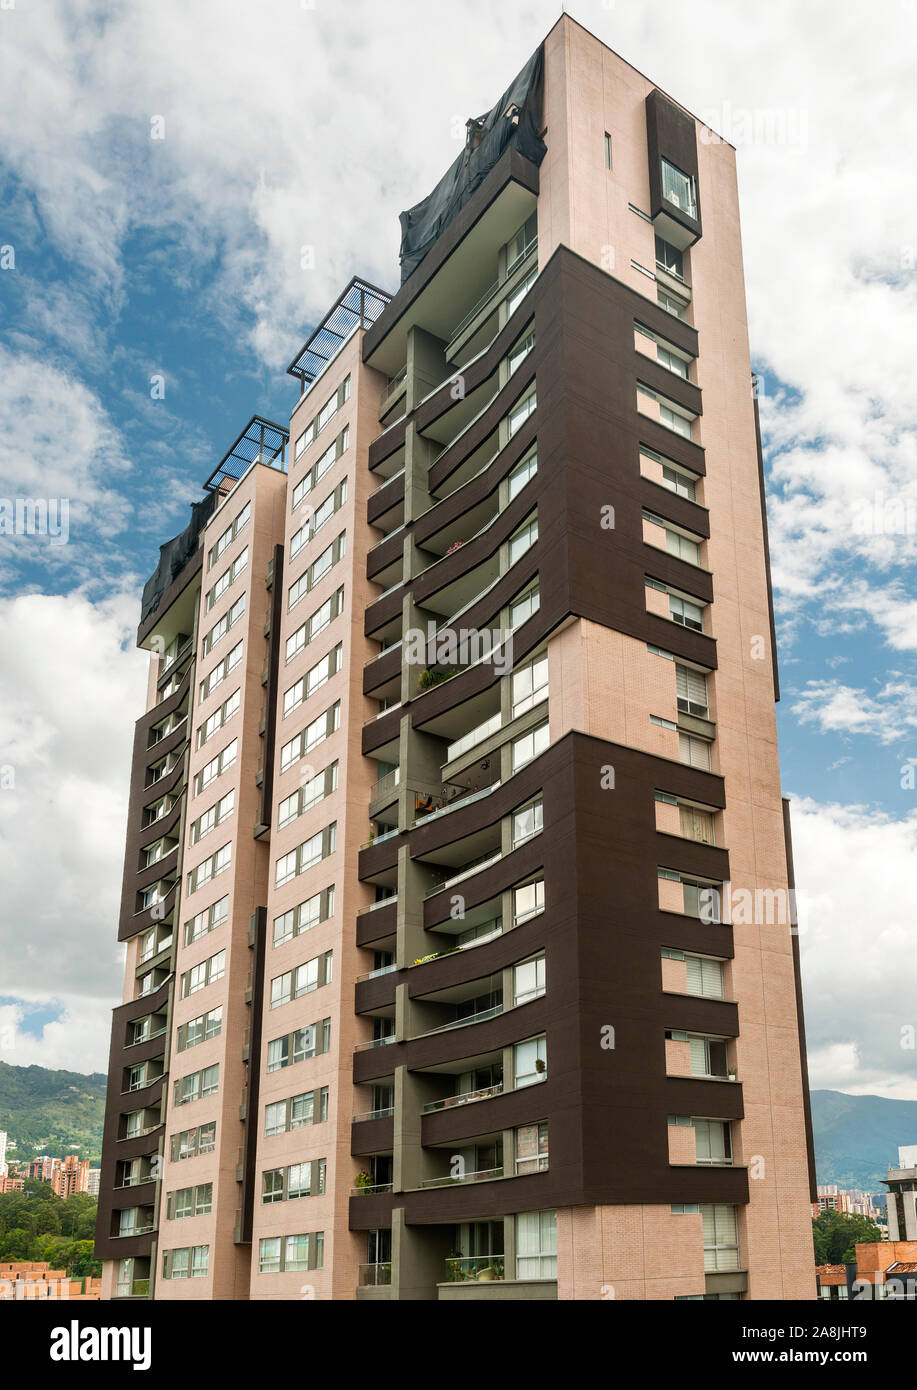 Apartment Building in Medellin, Colombie. Banque D'Images